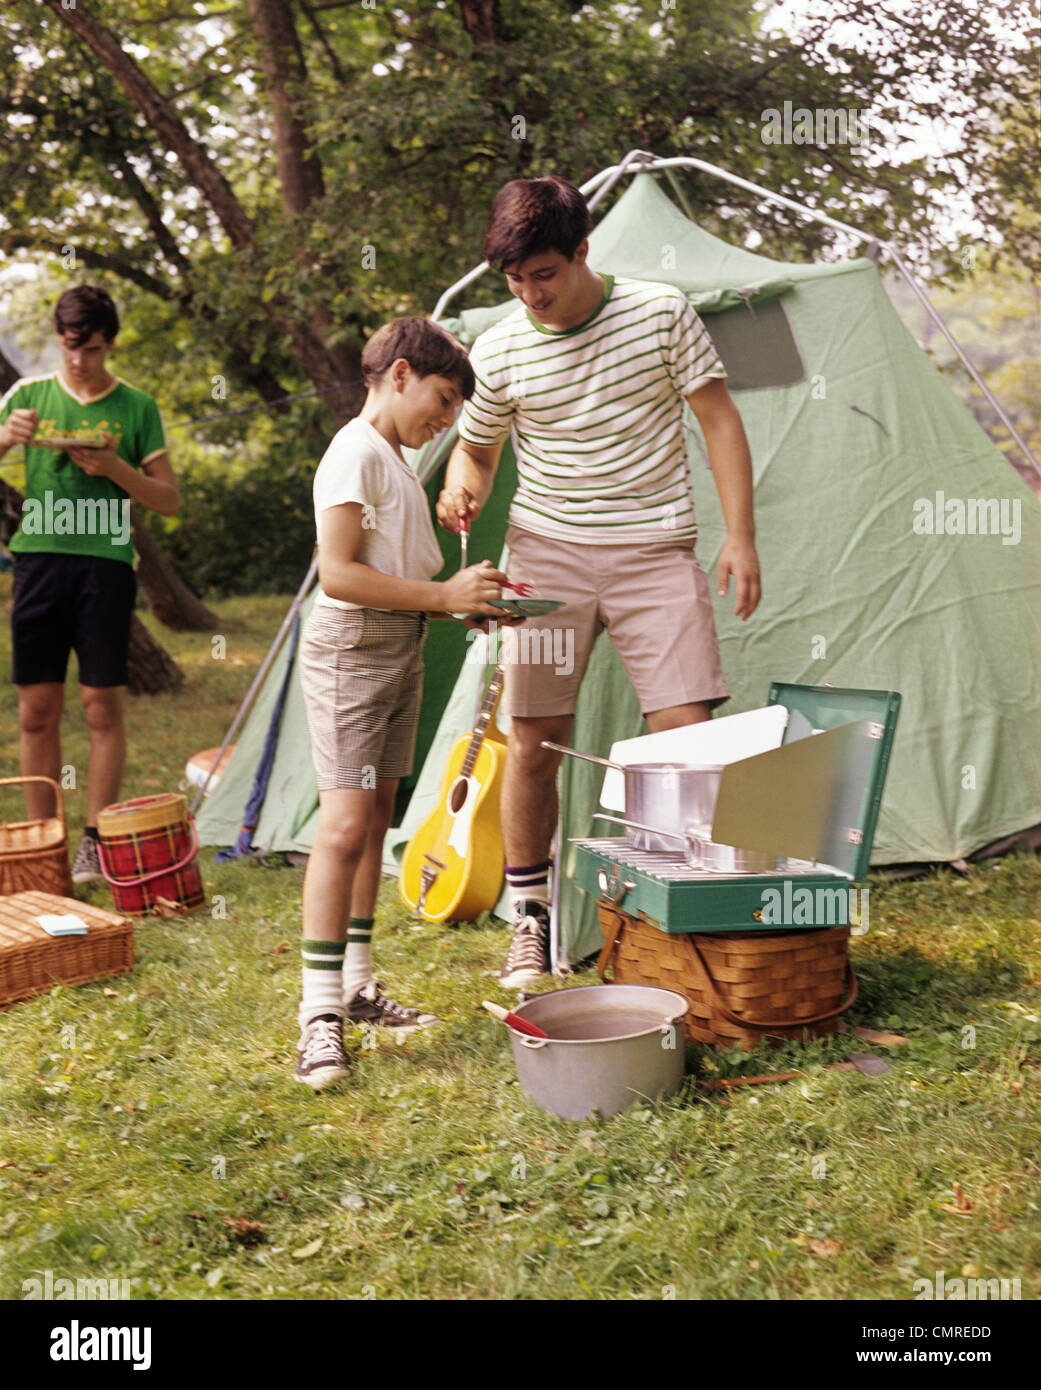 1960s THREE BOYS AT CAMPSITE COOKING CAMP STOVE EATING FOOD TENT TEENS Stock Photo